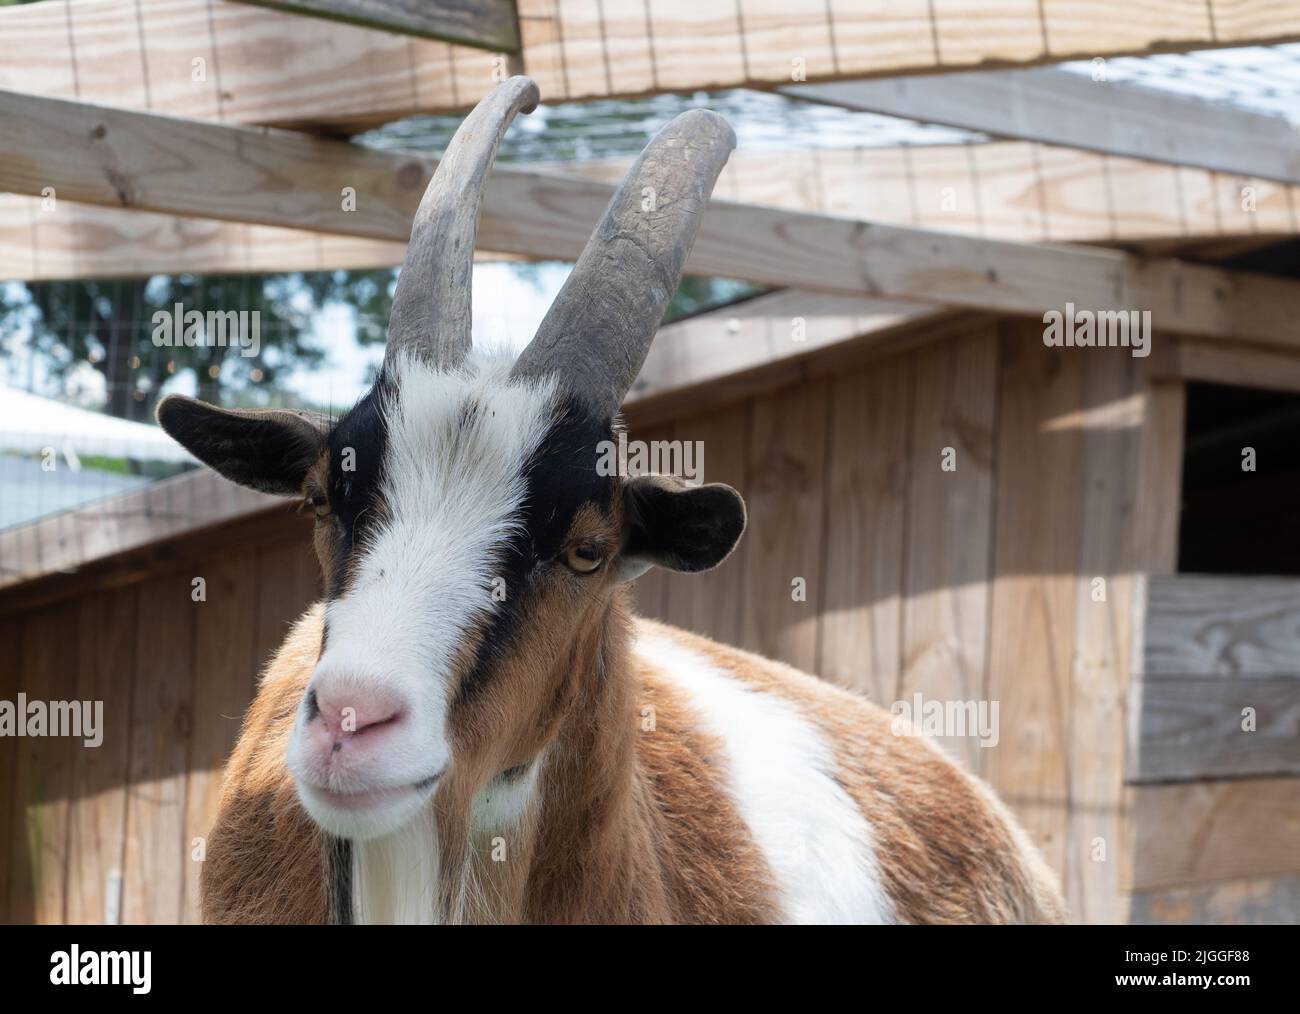 Close up of a white, brown, and black male goat with horns resting in a pen. Stock Photo